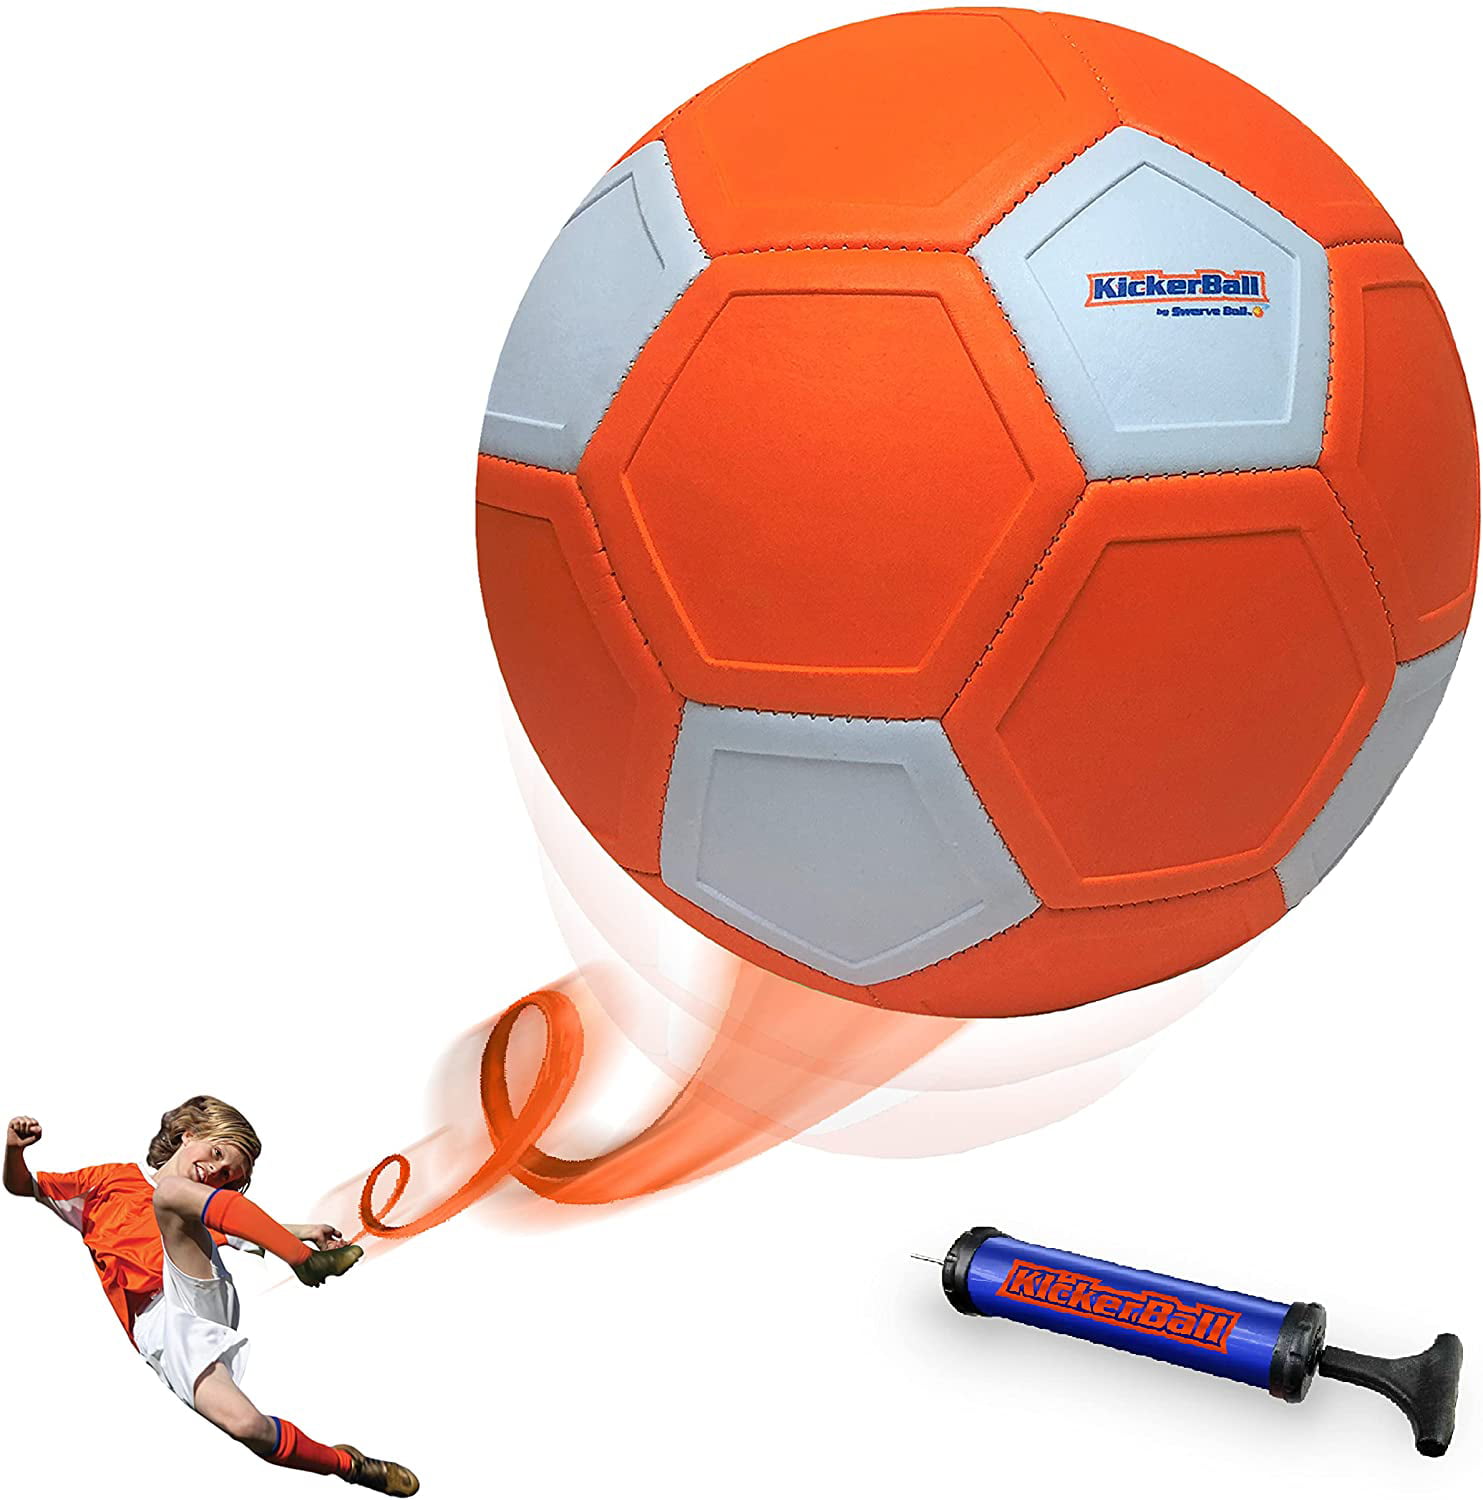 KickerBall by Swerve Ball 